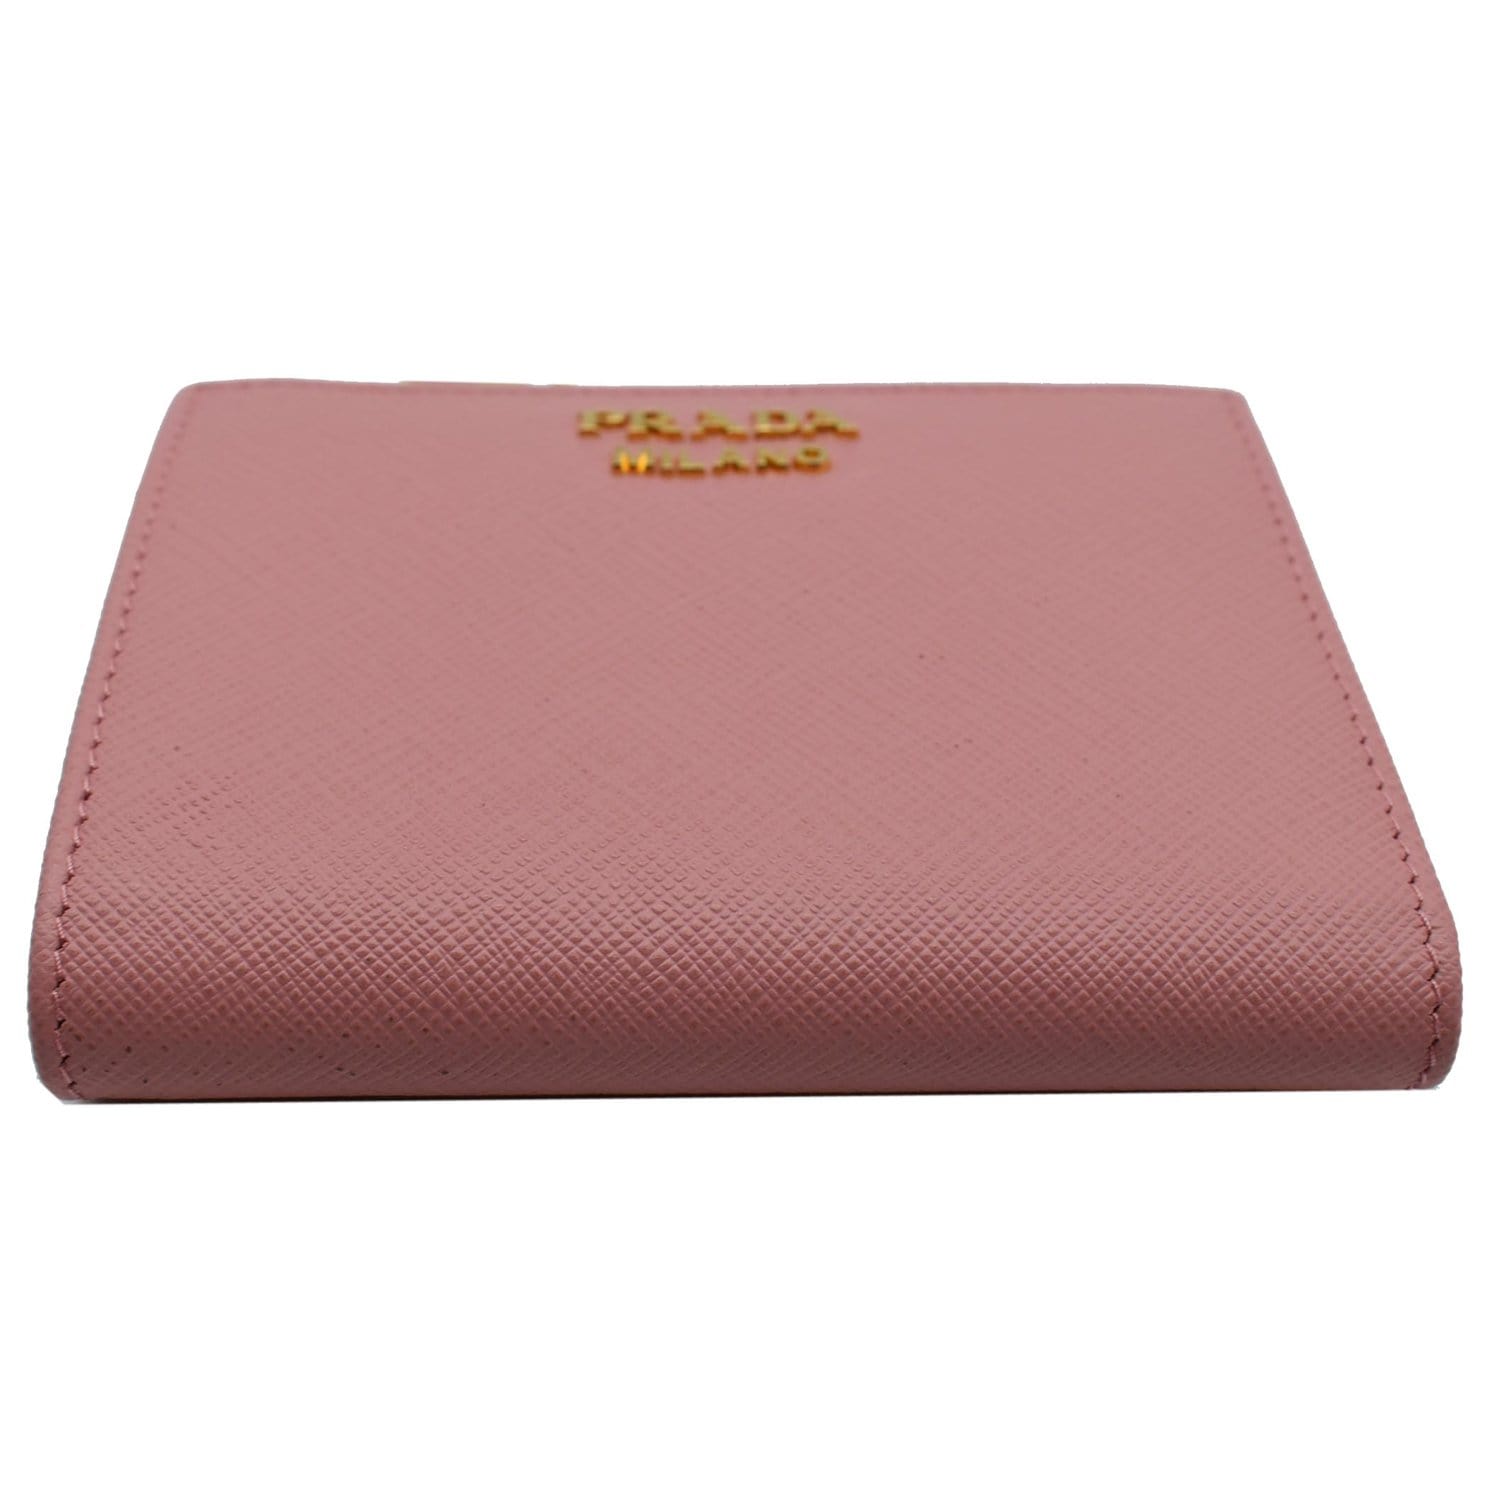 Prada Pre-owned Women's Leather Wallet - Pink - One Size